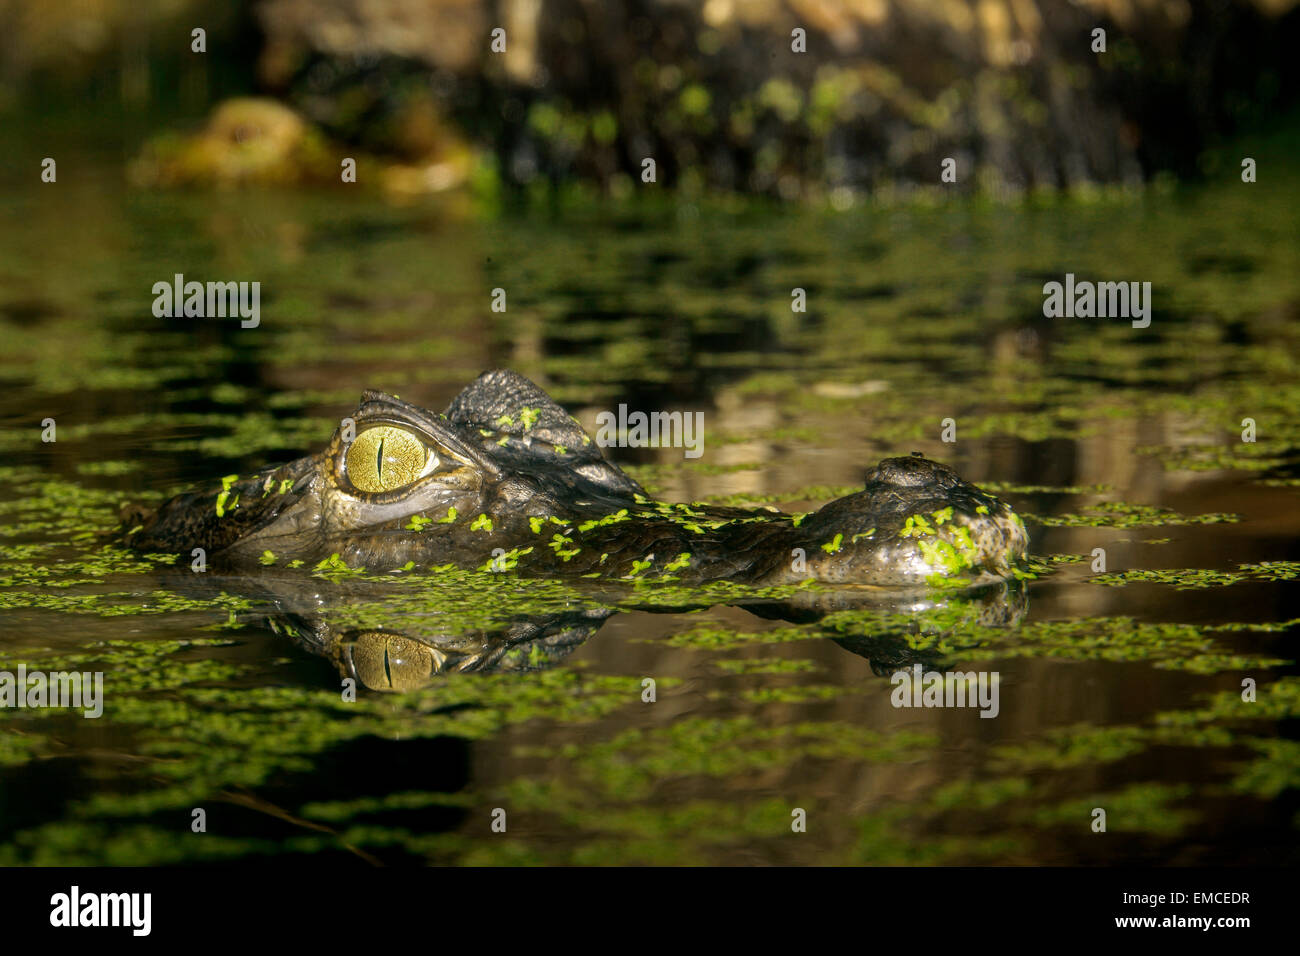 Spectacled Caiman (Caiman crocodilus) head emerging on the swamp water Stock Photo